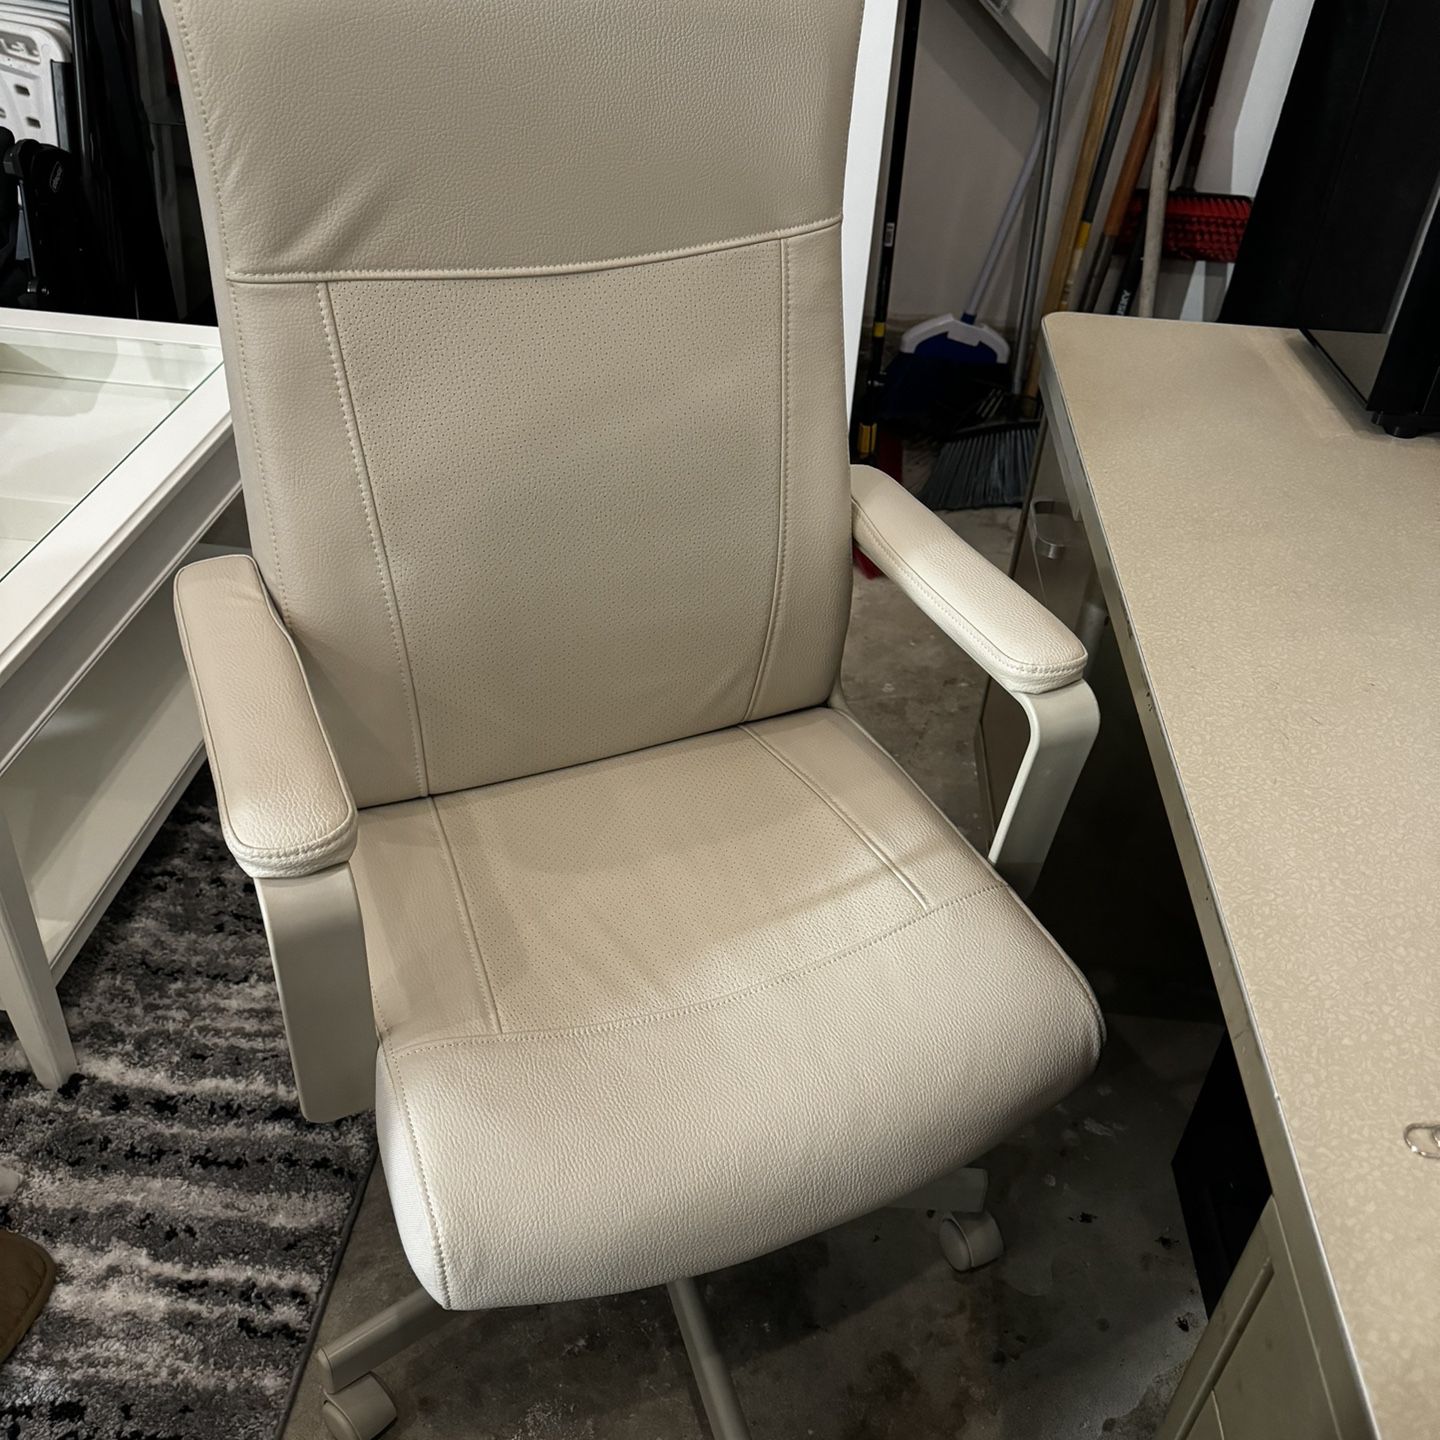 New Computer chair